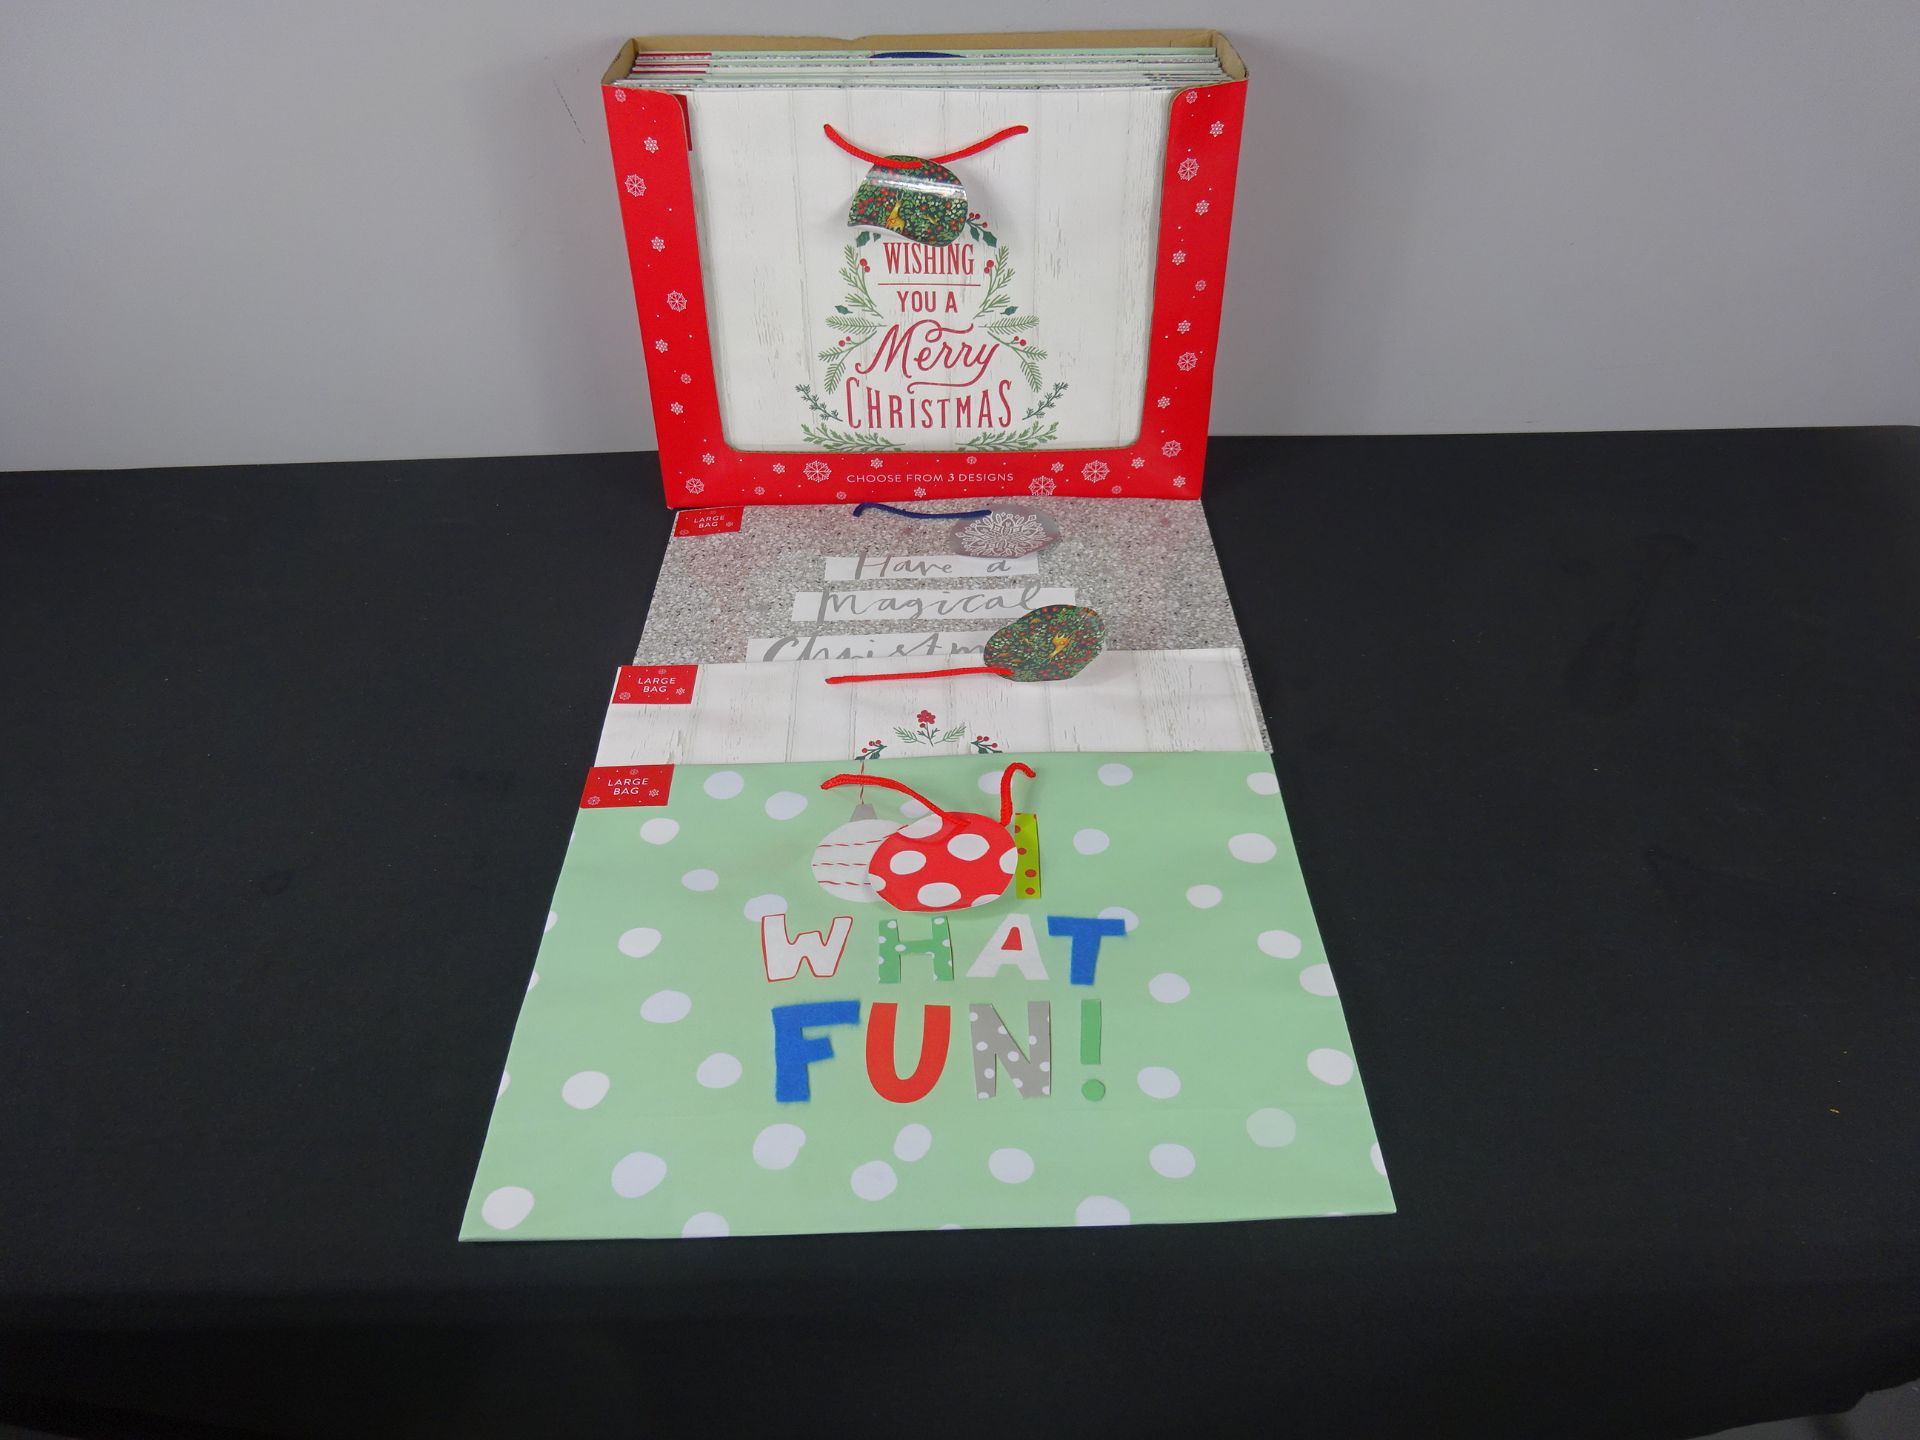 x24 Large 40 x 30cm Christmas Bags In Display Box - 3 Different Designs